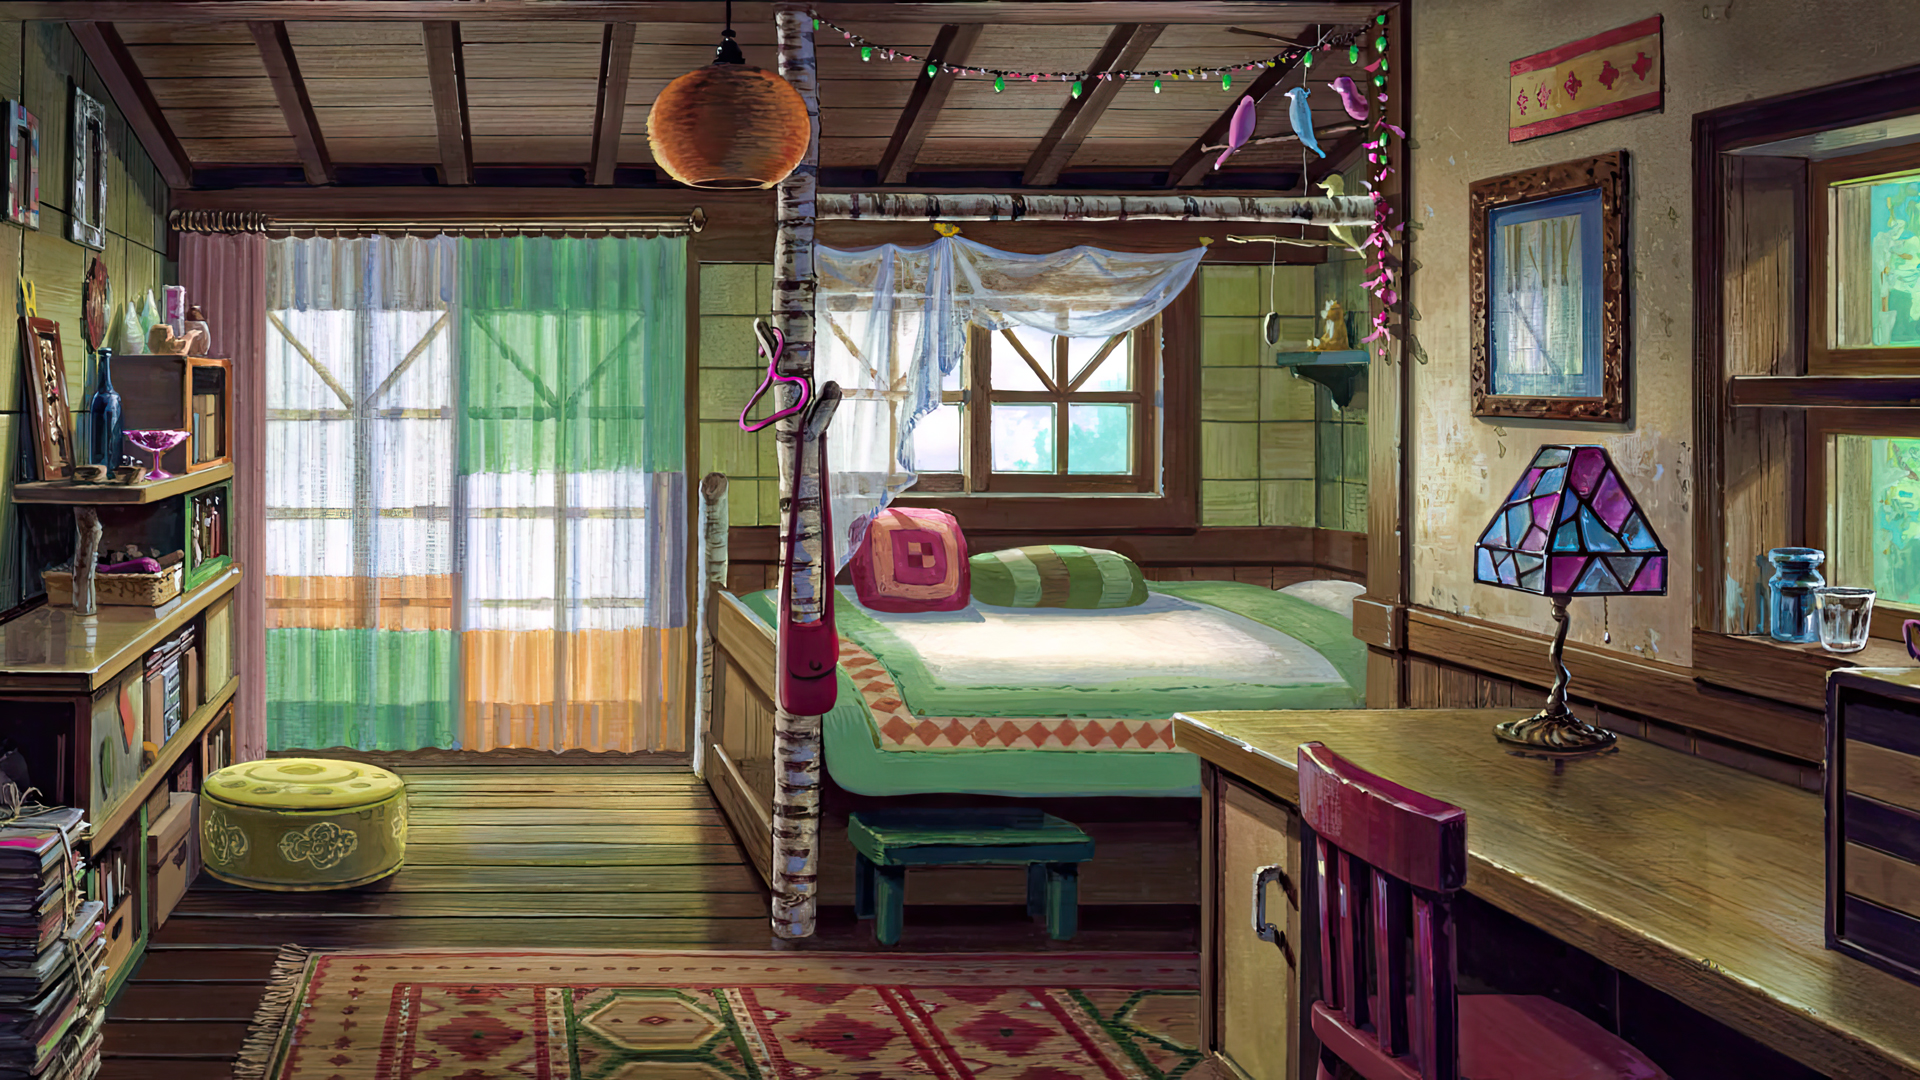 When Marnie Was There Studio Ghibli Animated Movies Film Stills Interior Anime Table Bed Curtains Ca 1920x1080